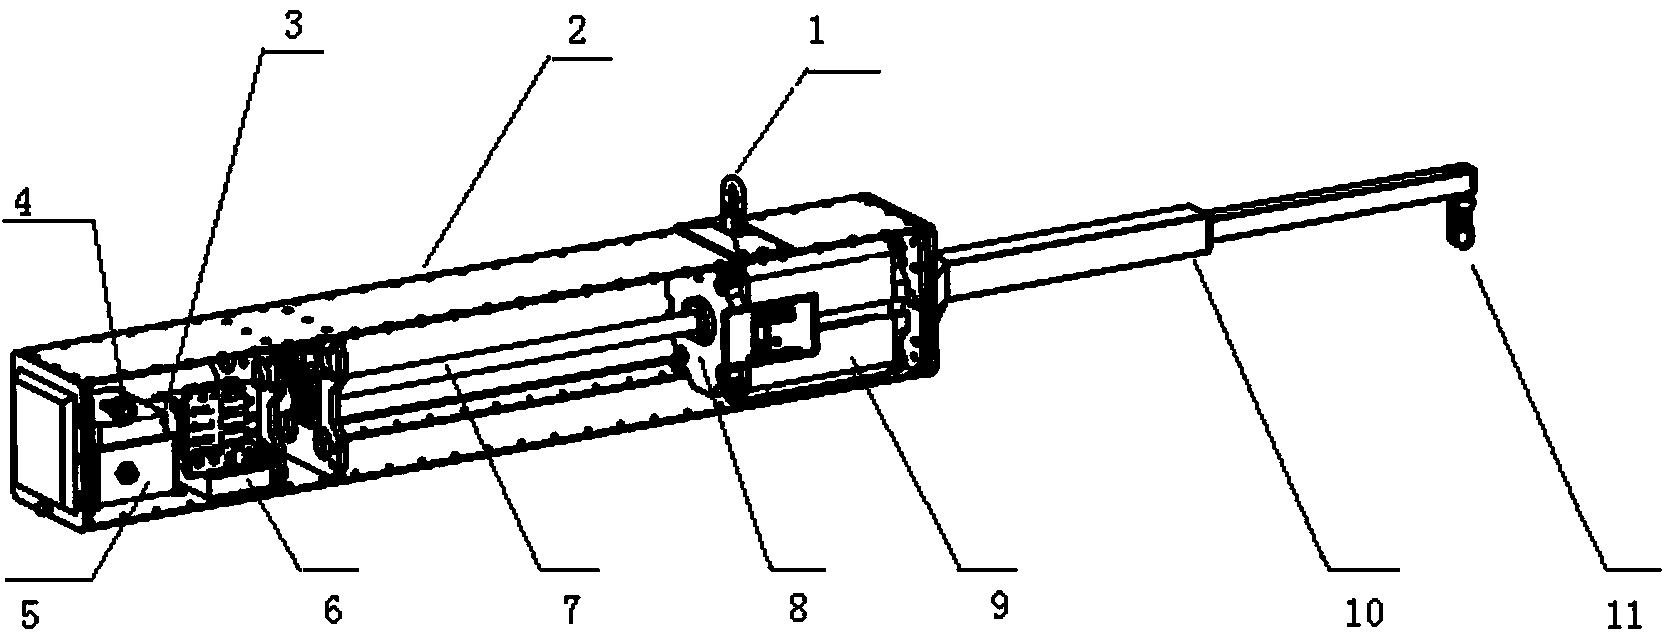 Automatic one-dimensional-equilibrium adjusting lifting tool for spacecraft